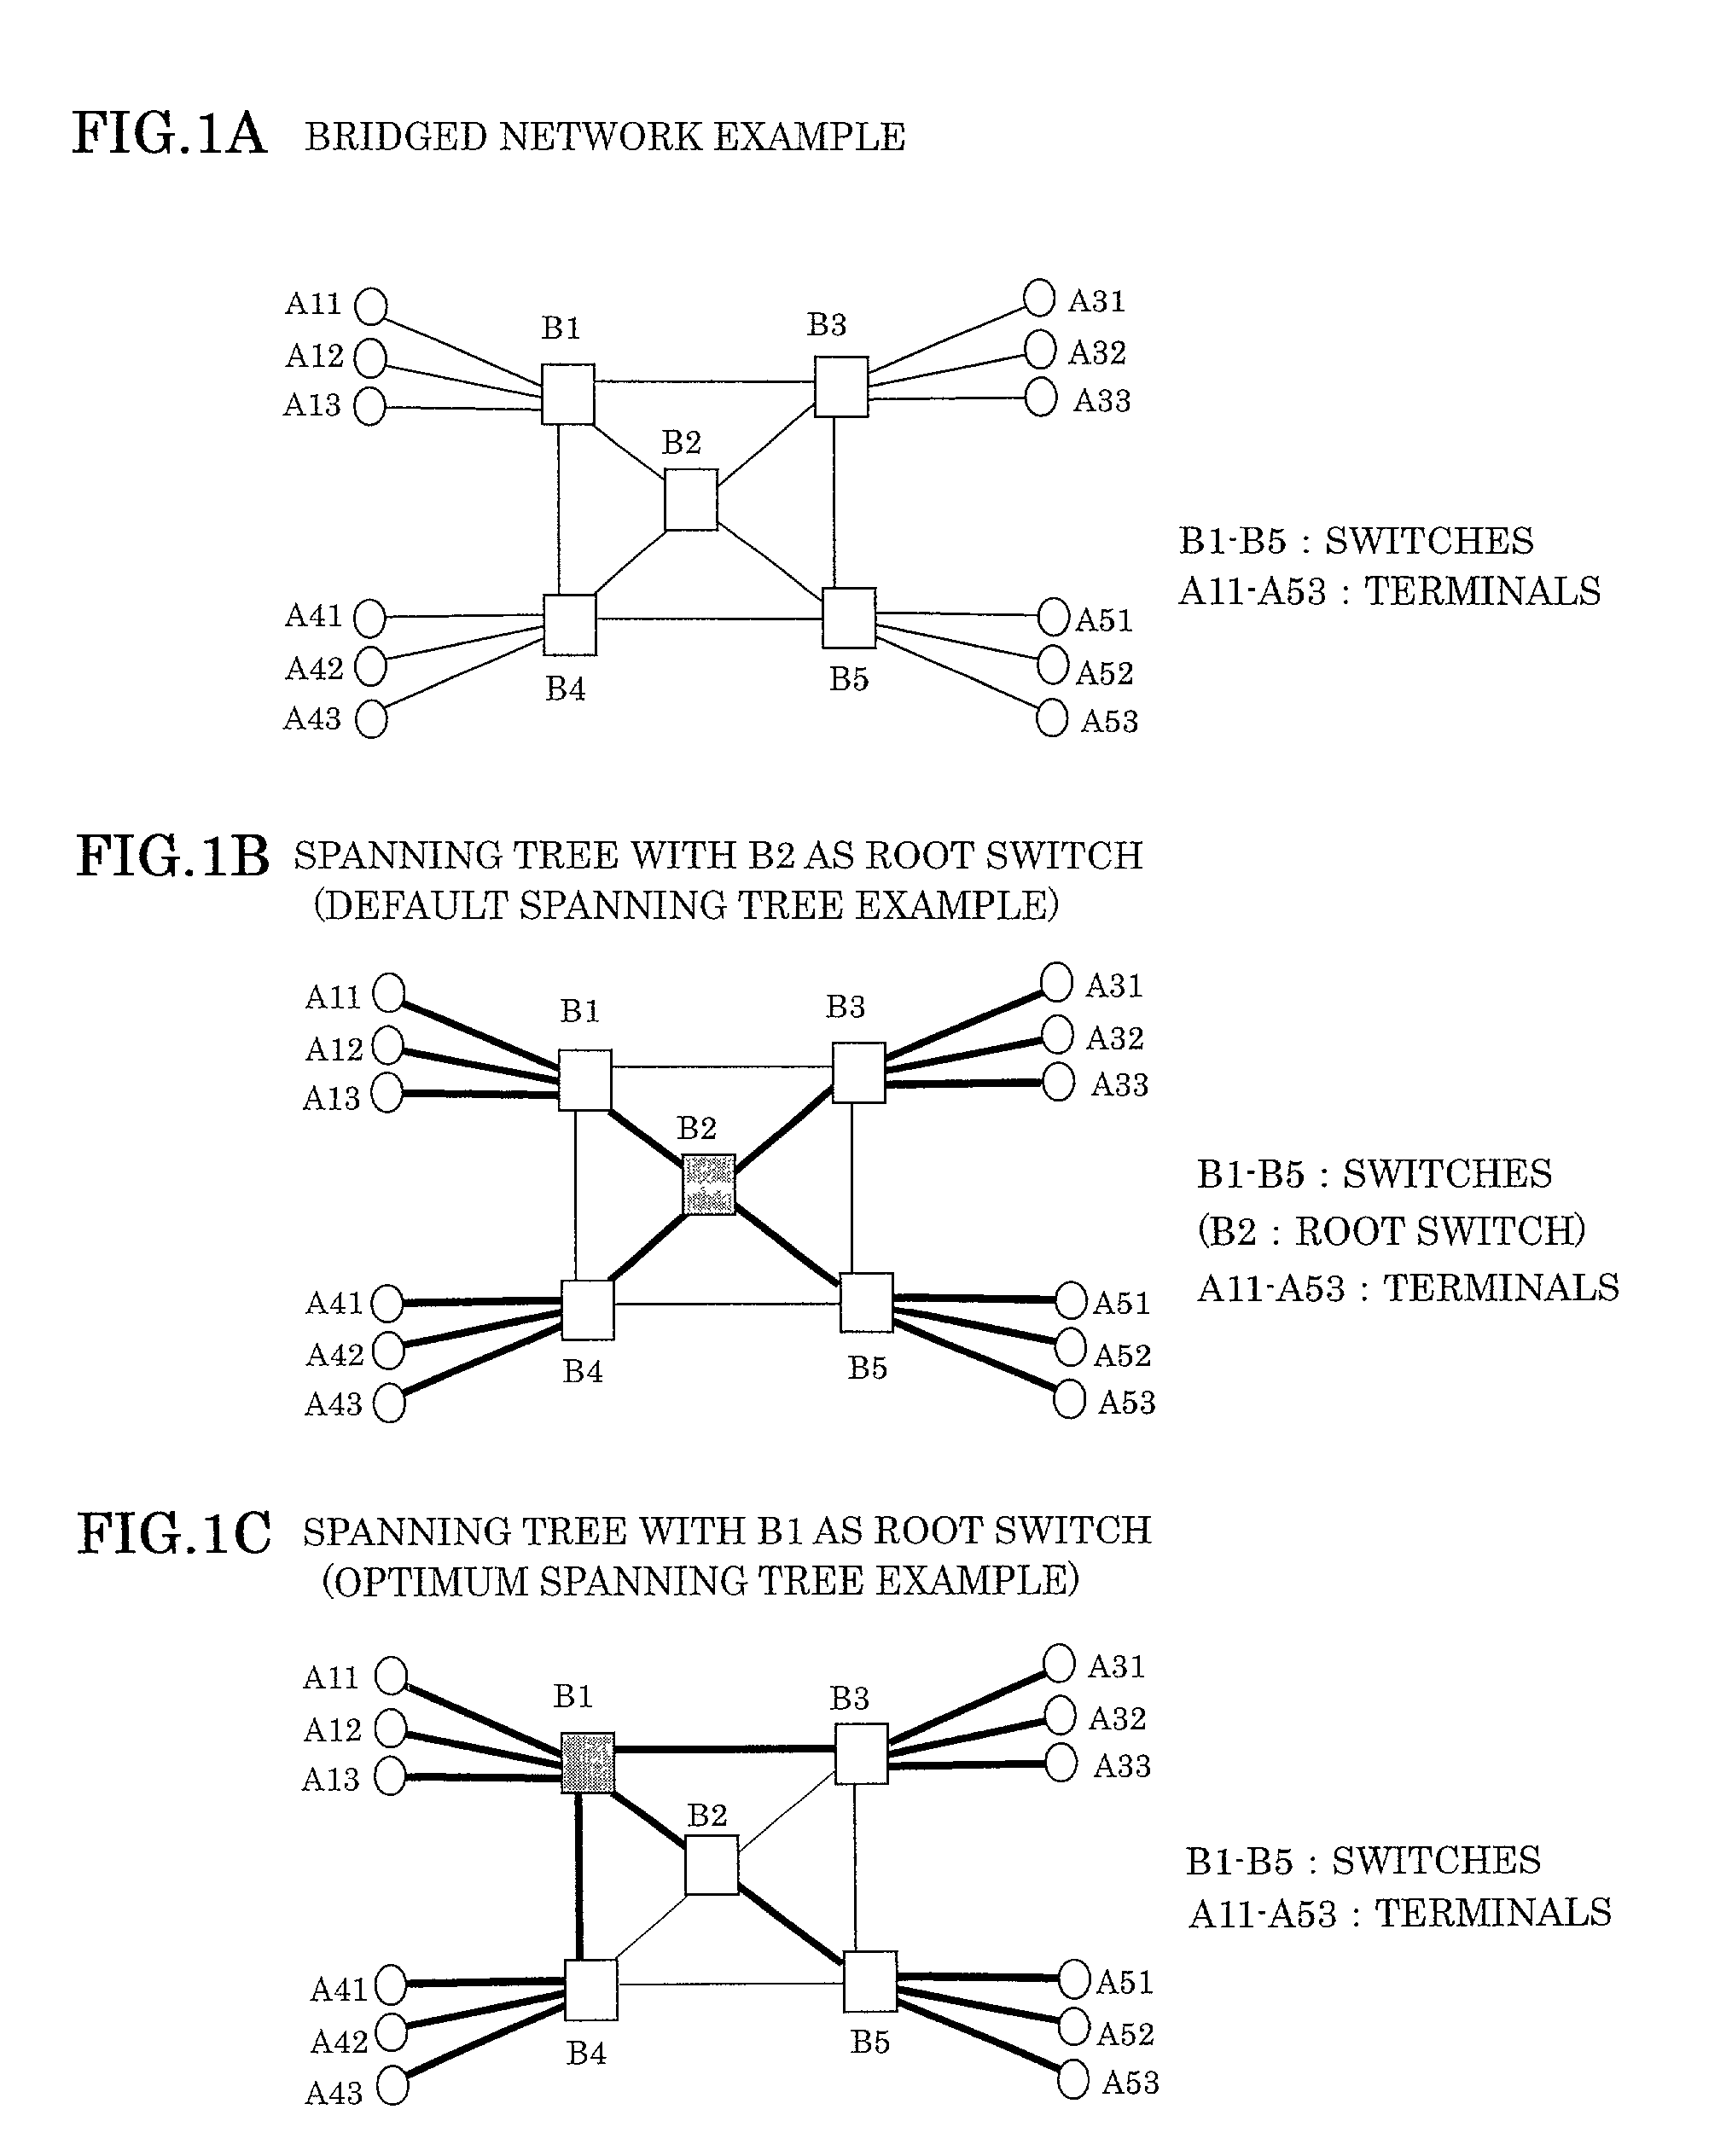 Switch and bridged network